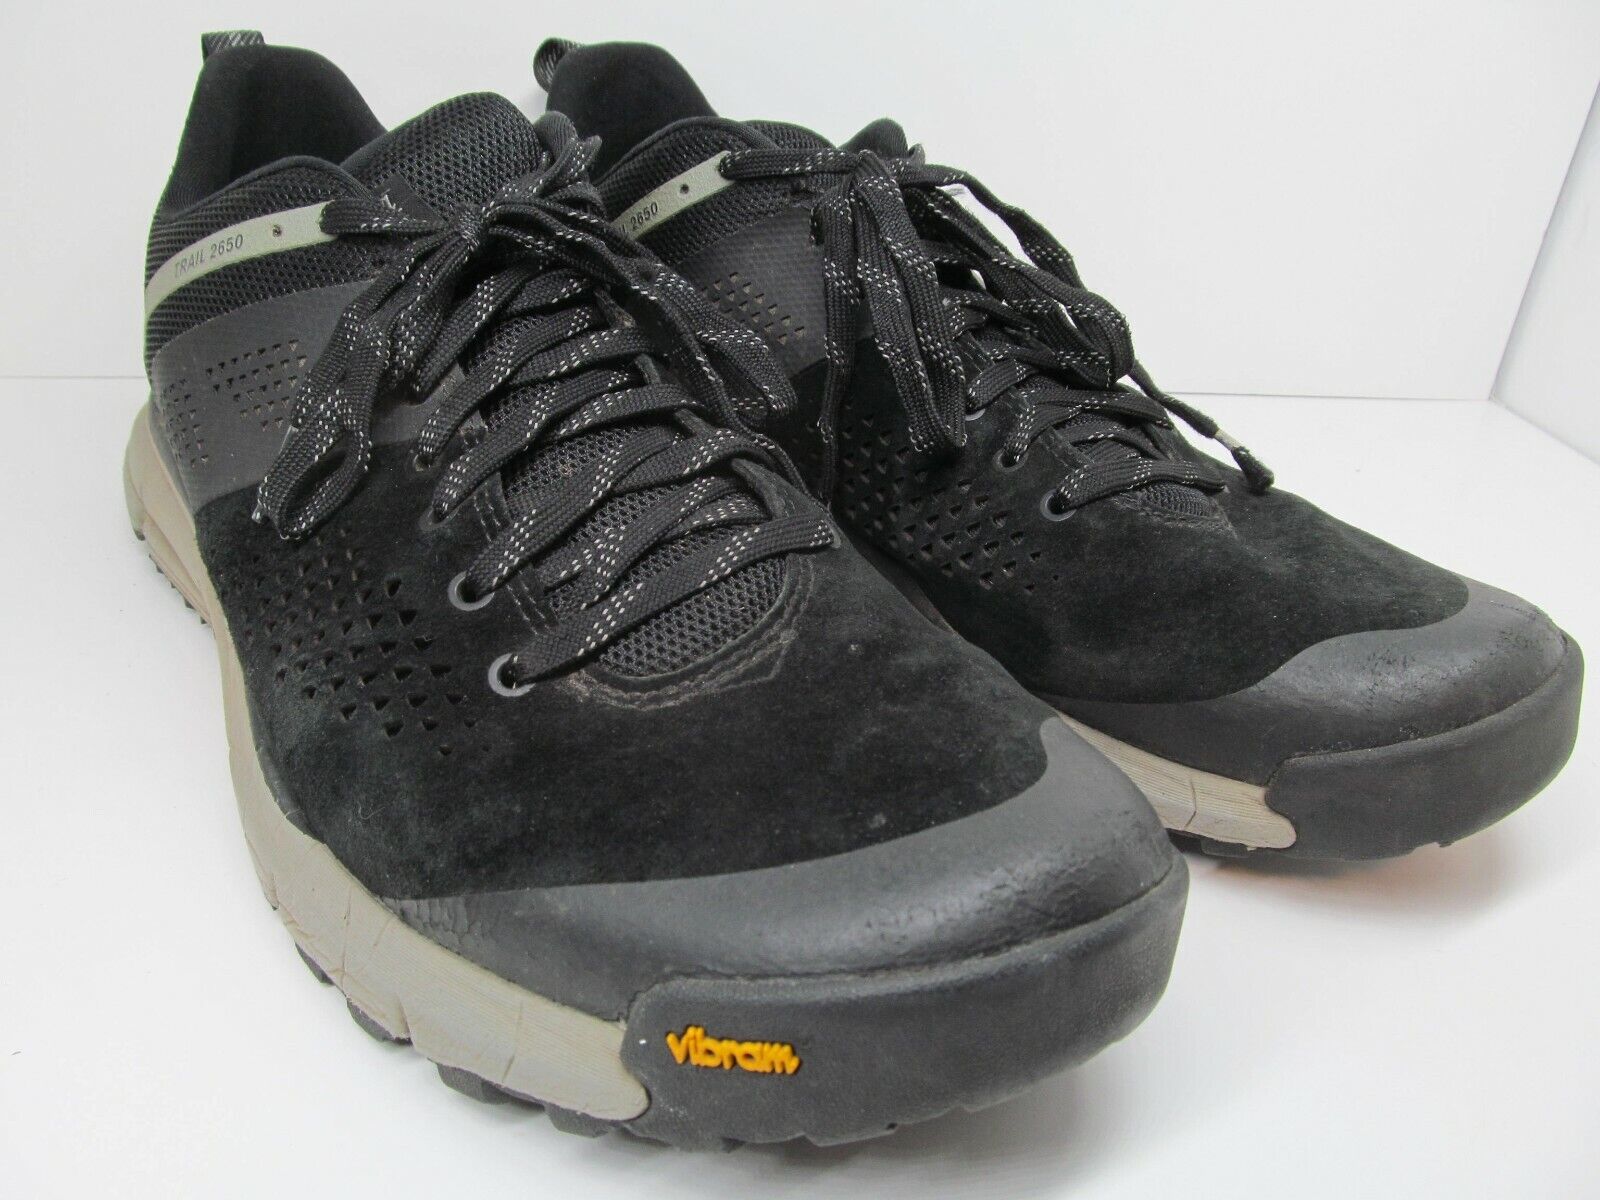 Danner Trail 2650 Mens Black And Gray Vibram Sole Hiking Shoes...